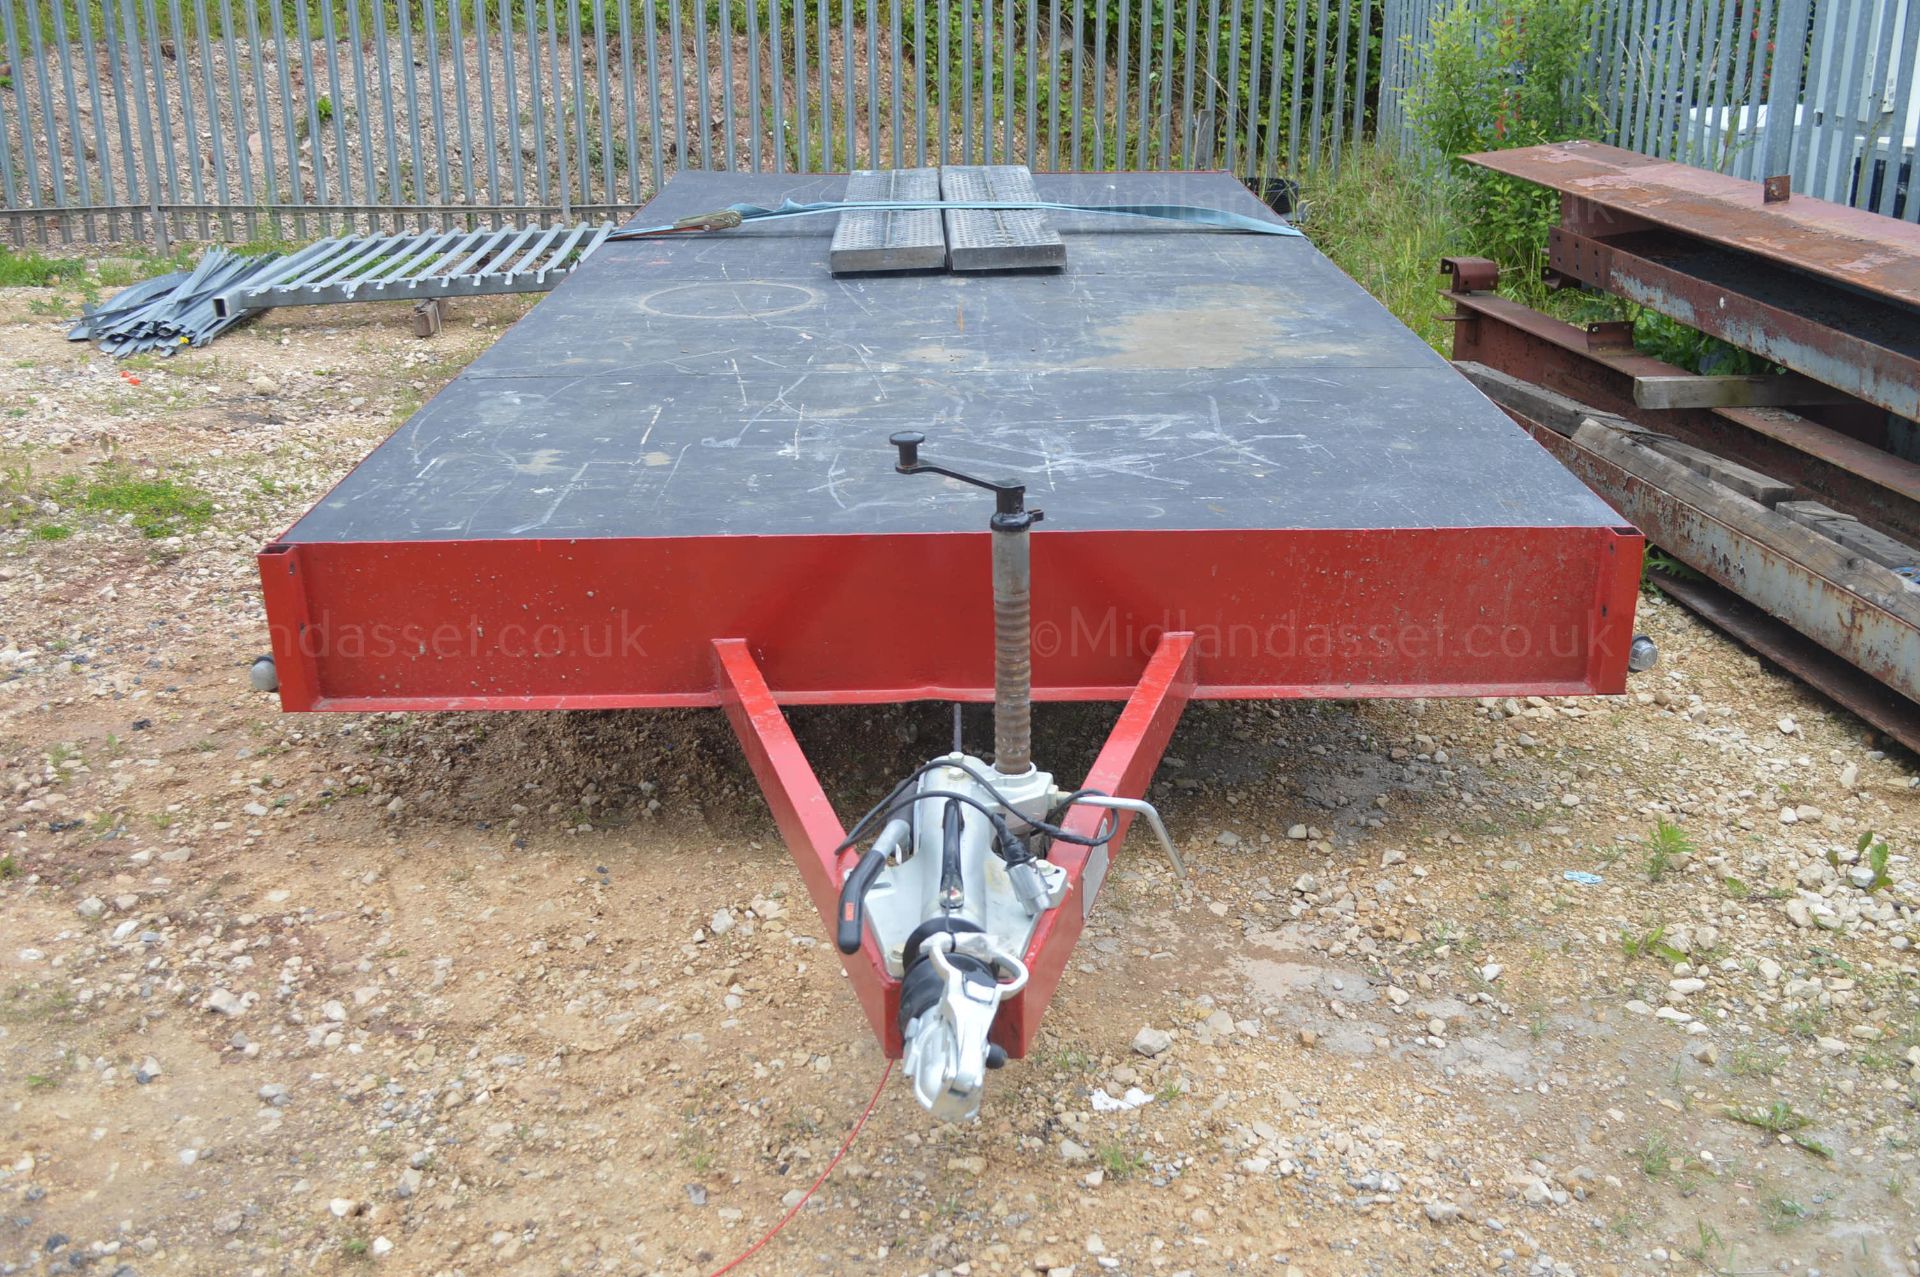 1996 FLATBED 3.5 TONNE TWIN AXLE TRAILER *NO VAT* - Image 2 of 6